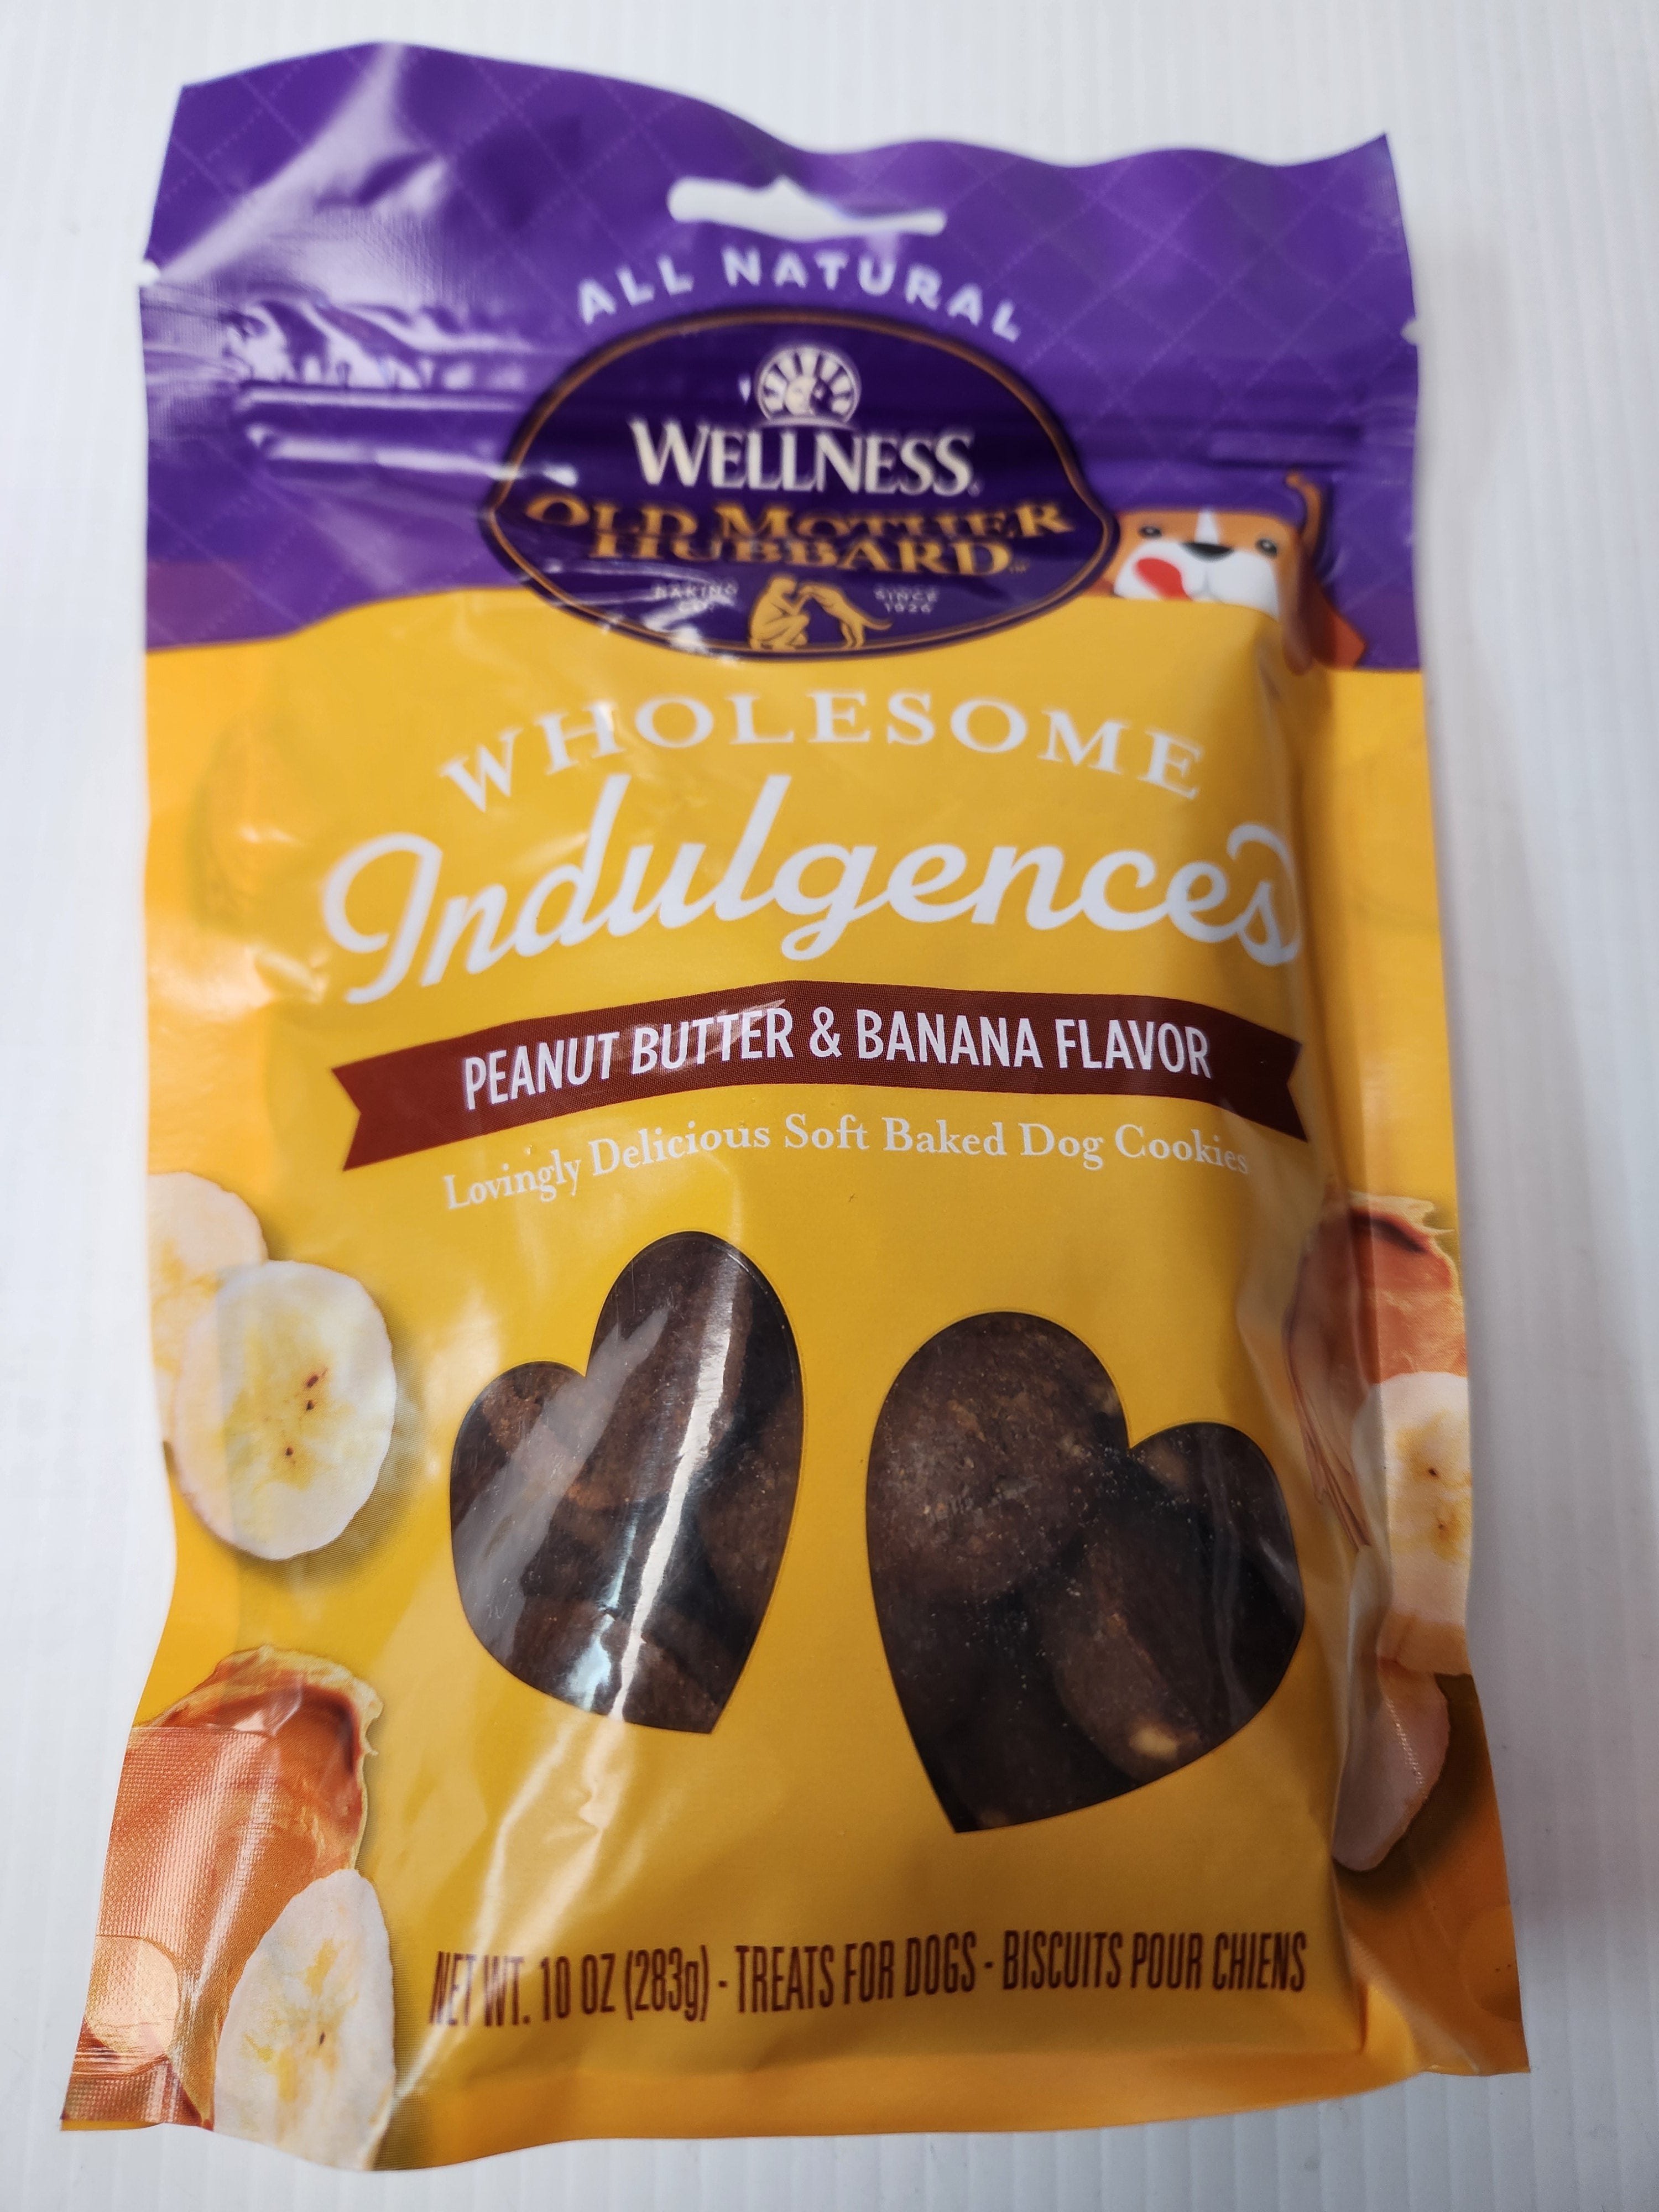 Wellness Old Mother Hubbard Wholesome Indulgences Peanut Butter & Banana Flavor Soft Baked Dog Cookies 283g